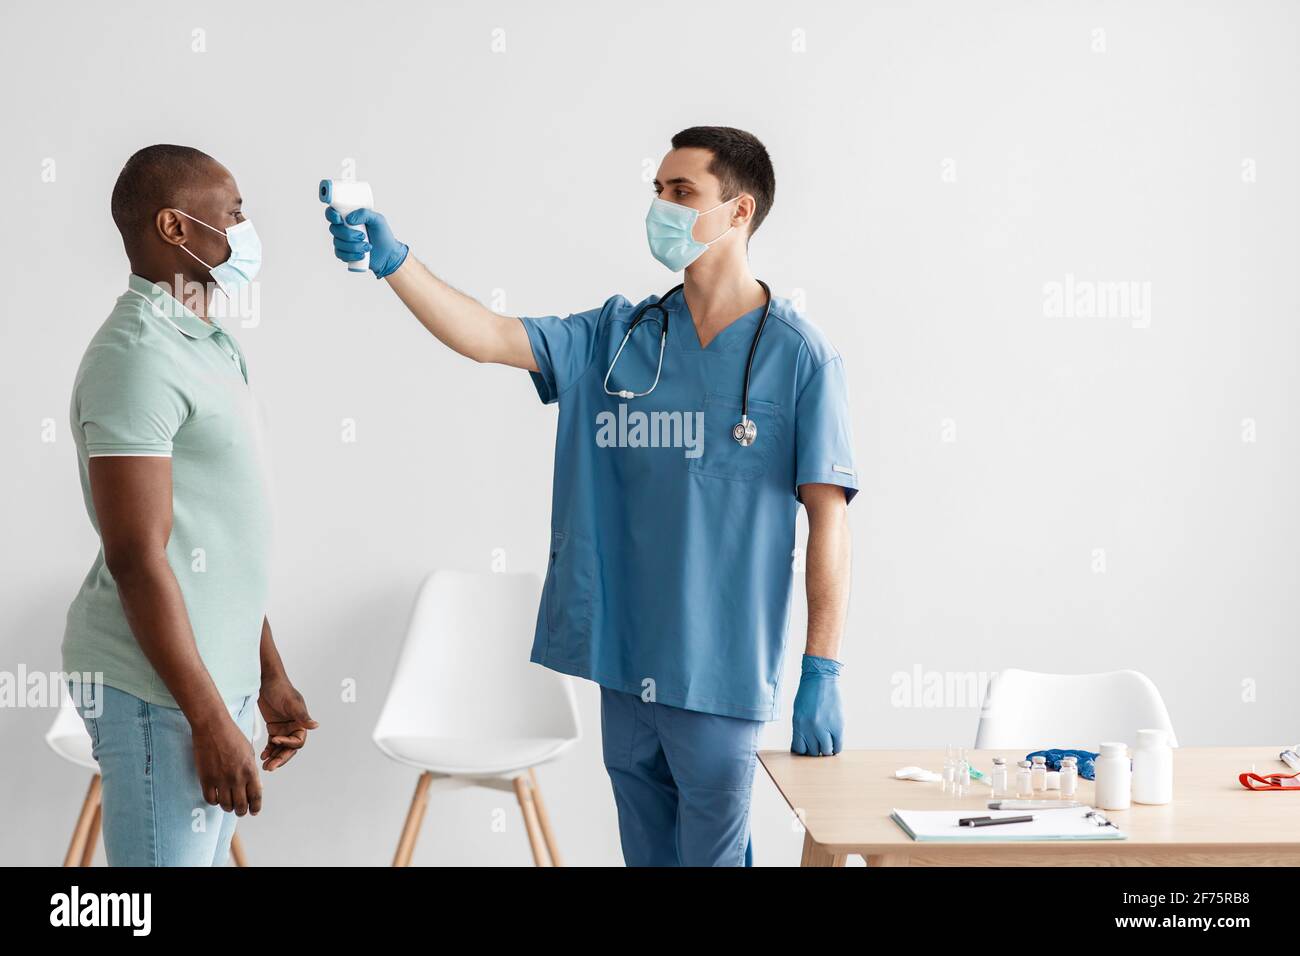 Measuring fever with gun, scanning forehead of african american man in clinic Stock Photo